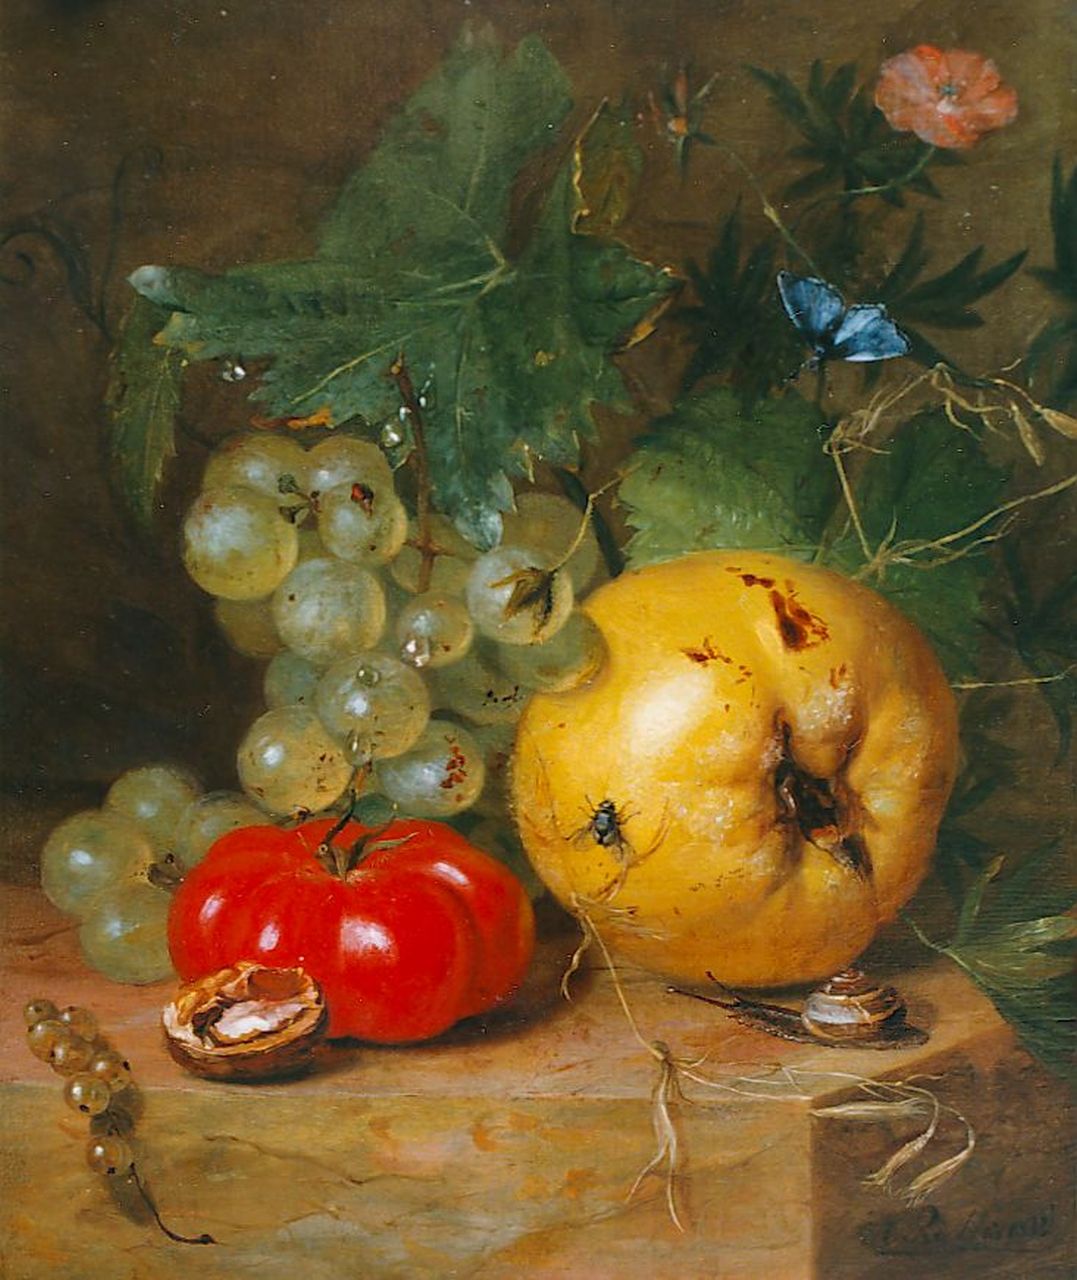 Reekers sr. H.  | Hendrik Reekers sr., A still life with grapes, flowers,a tomato and a snail, Öl auf Holz 25,9 x 21,8 cm, signed l.r. und dated 1833